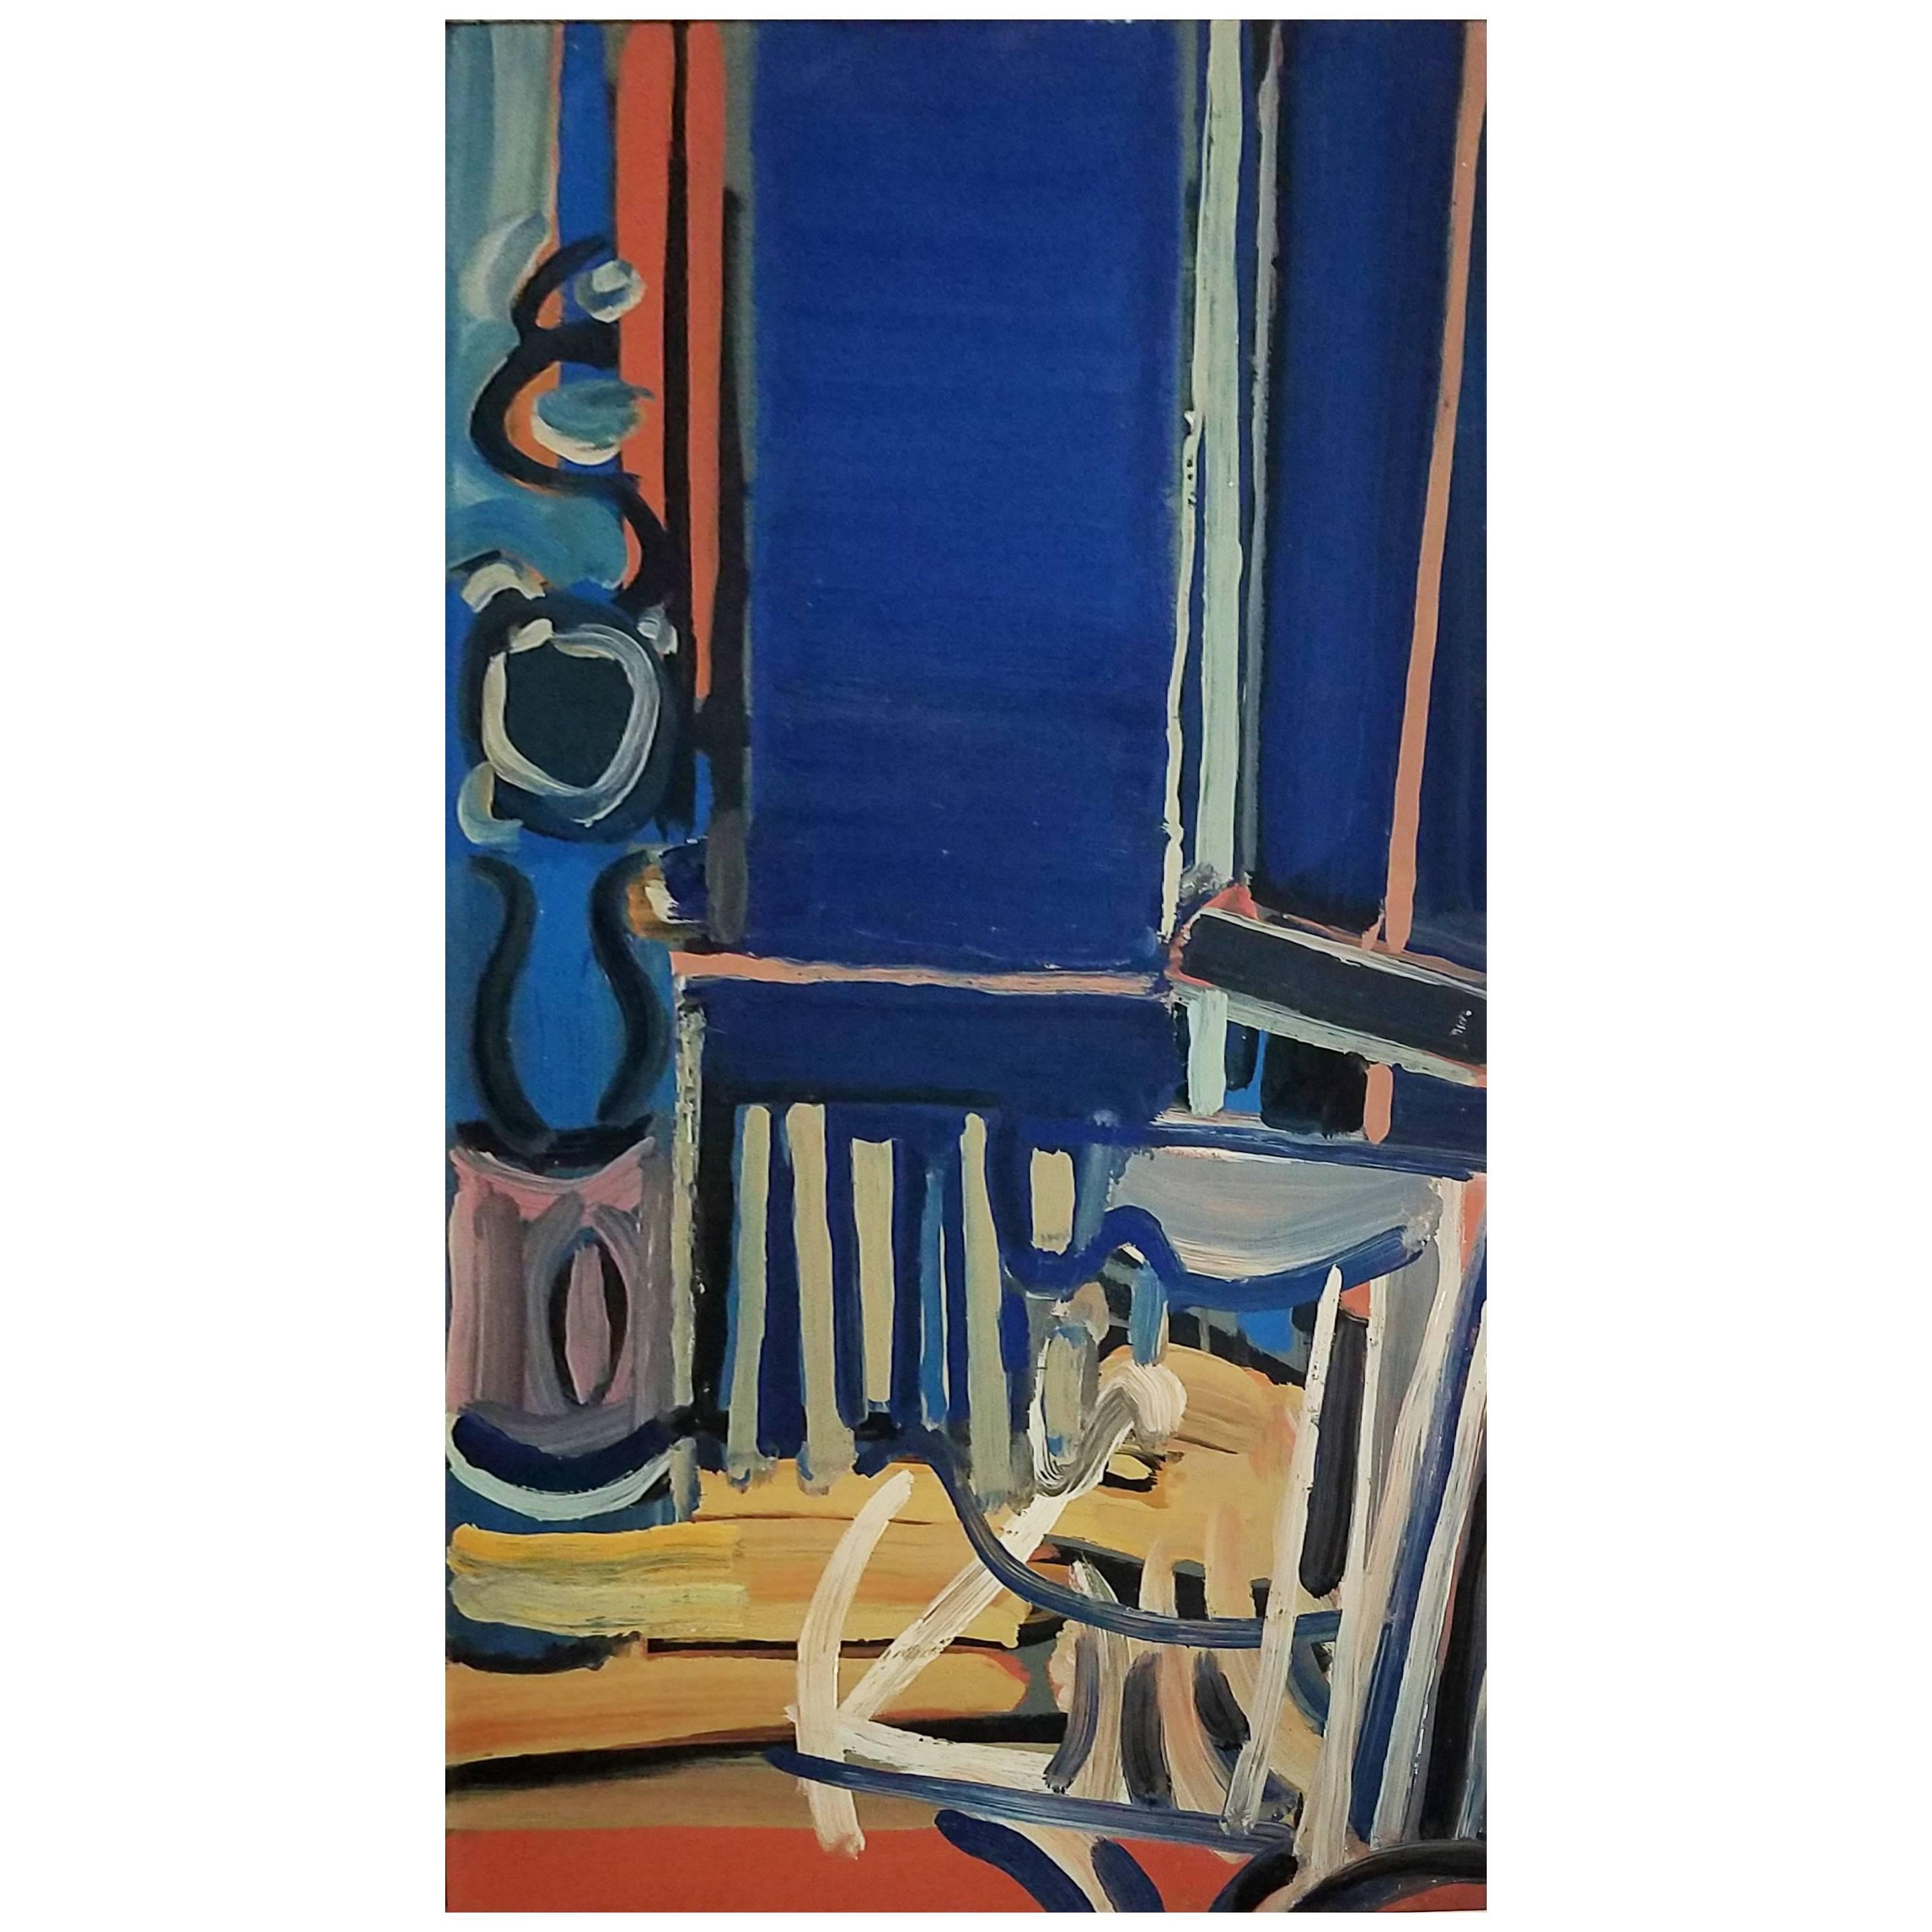 A 20th century abstract still life by Daniel Clesse, painted in Montpellier, France in 1970.

Daniel Clesse was a French painter born in 1932 Paris, France and passed away in 2016. He and his wife Christiane Clesse dedicated their lives to